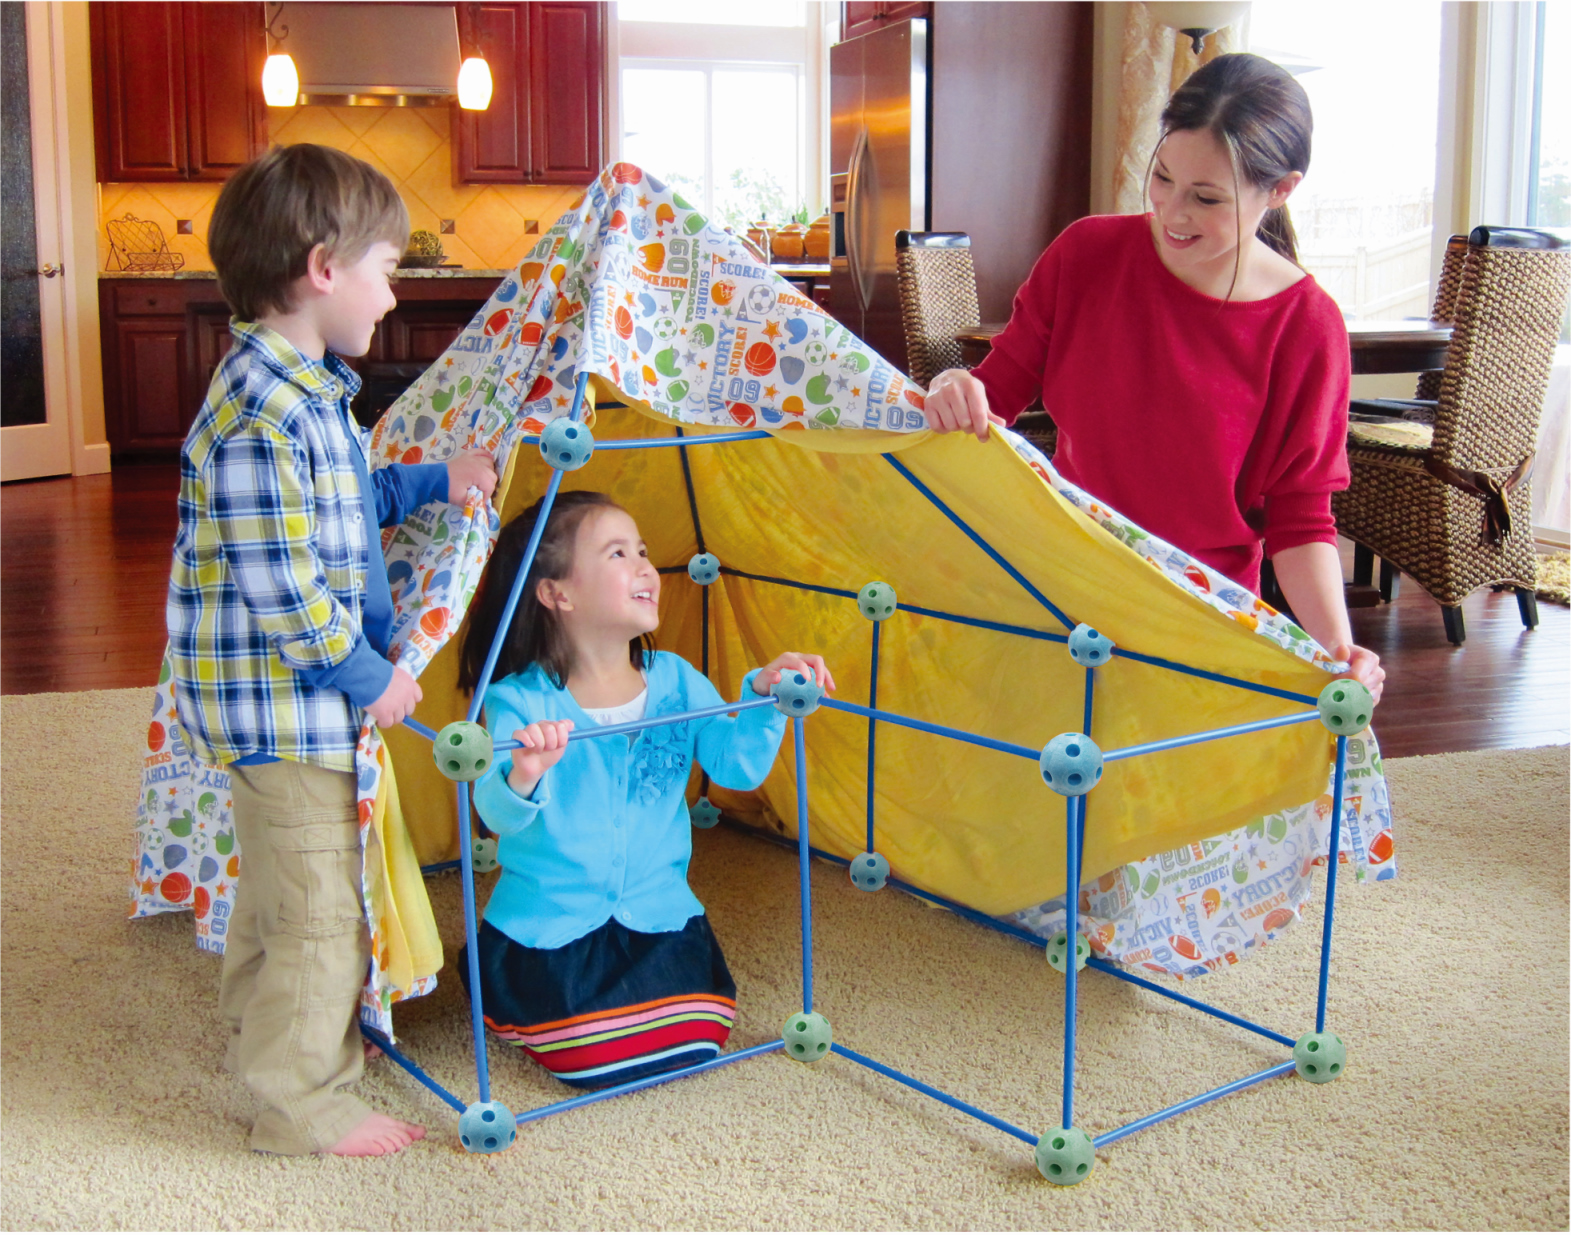 Children Building Your Own Den Kit Play Construction Fort Tent Making Xmas  Gift